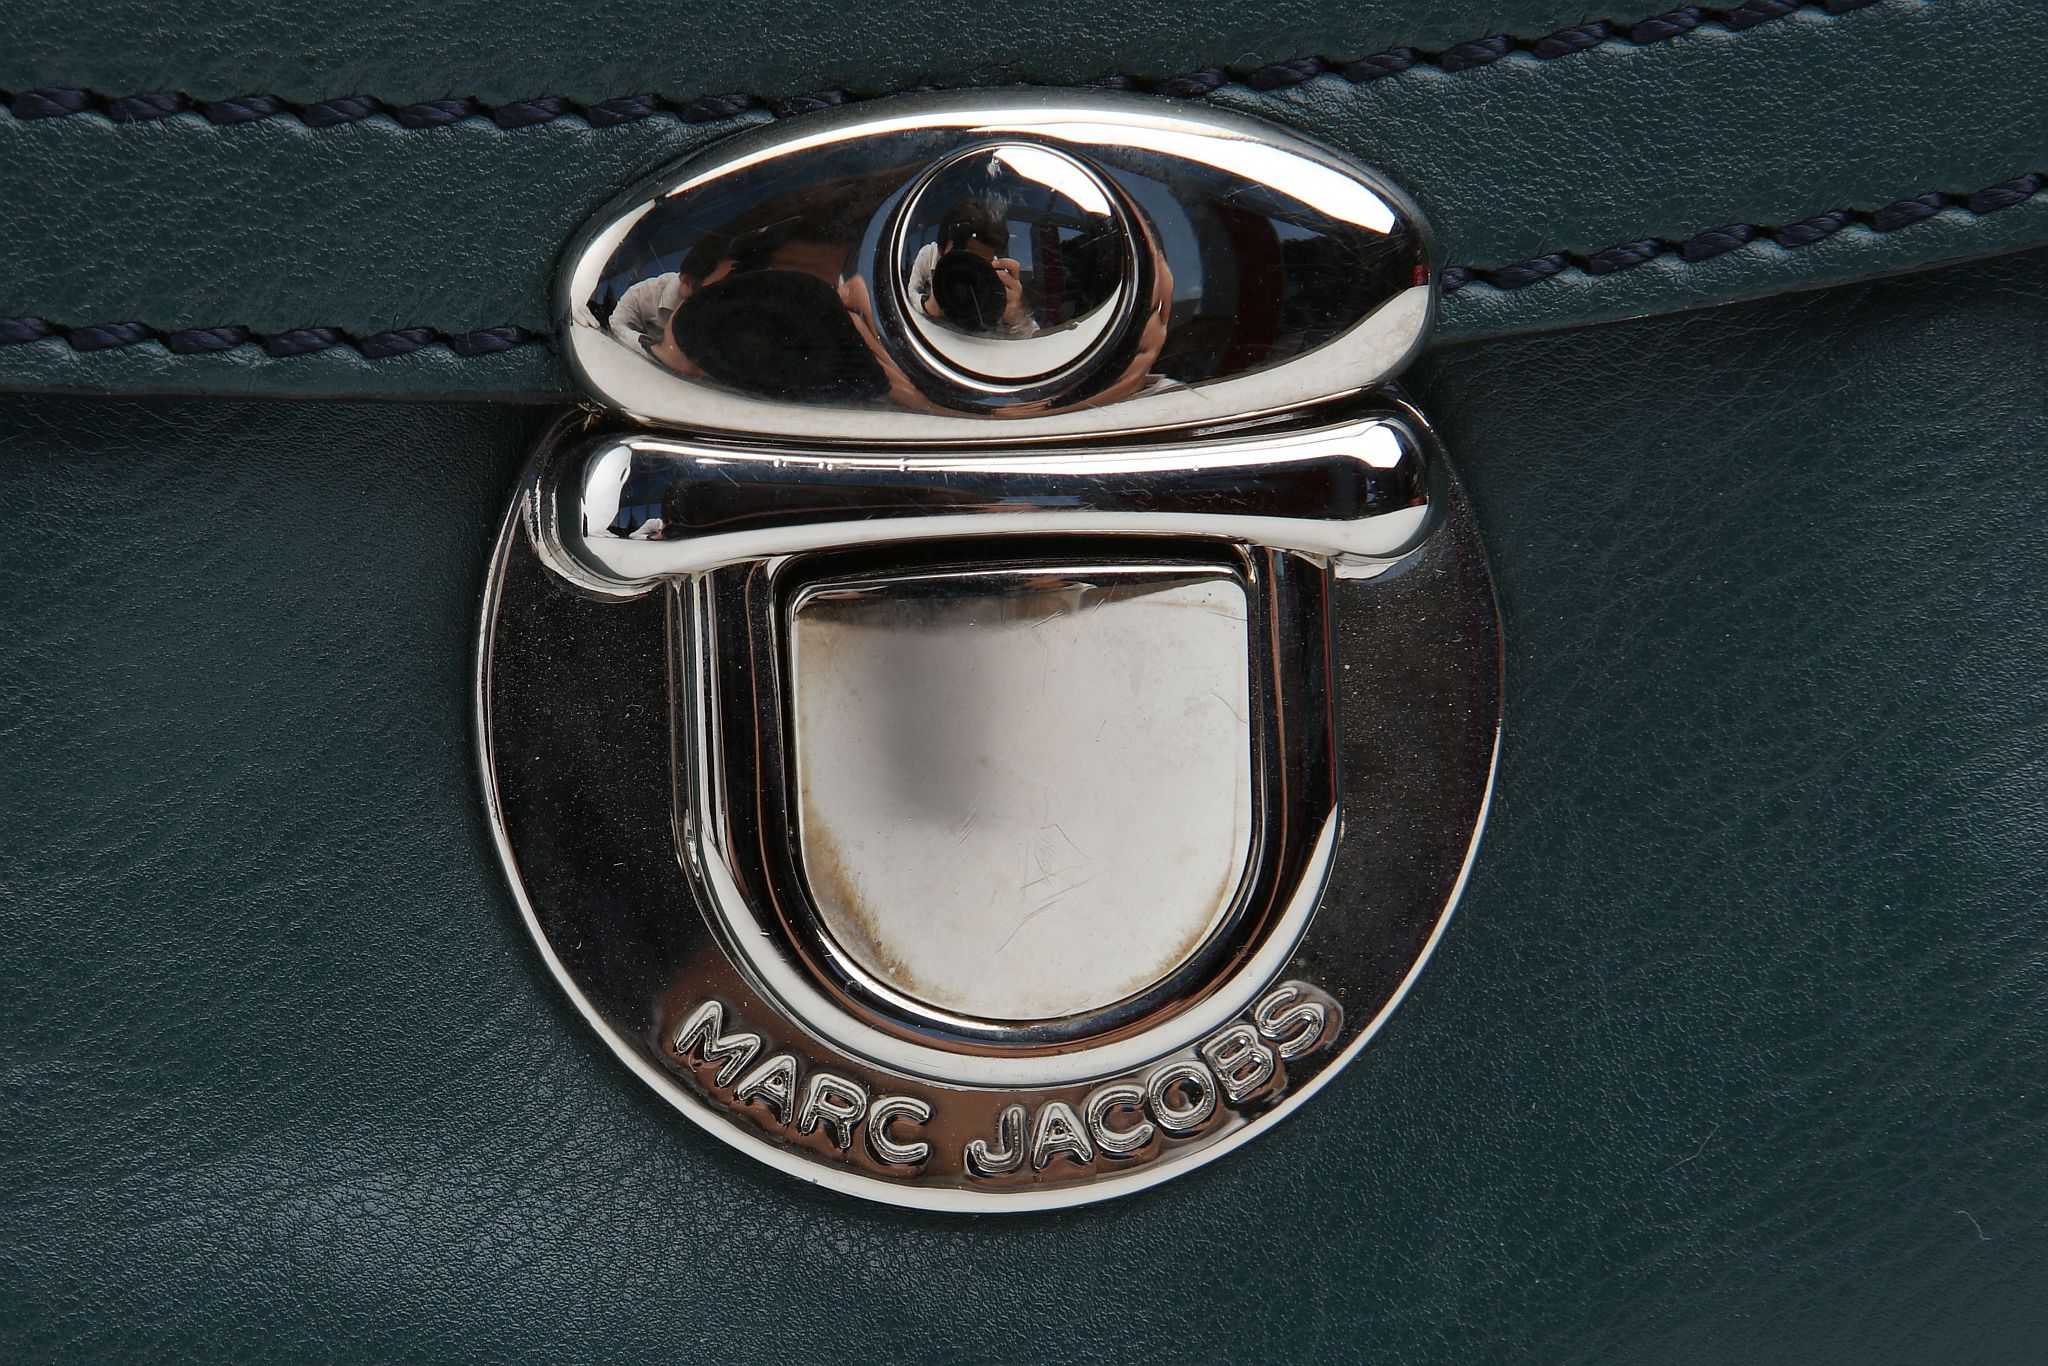 MARC JACOBS VENETIA HANDBAG, teal leather with silver hardware, 38cm wide, 23cm high, with dust bag - Image 8 of 12